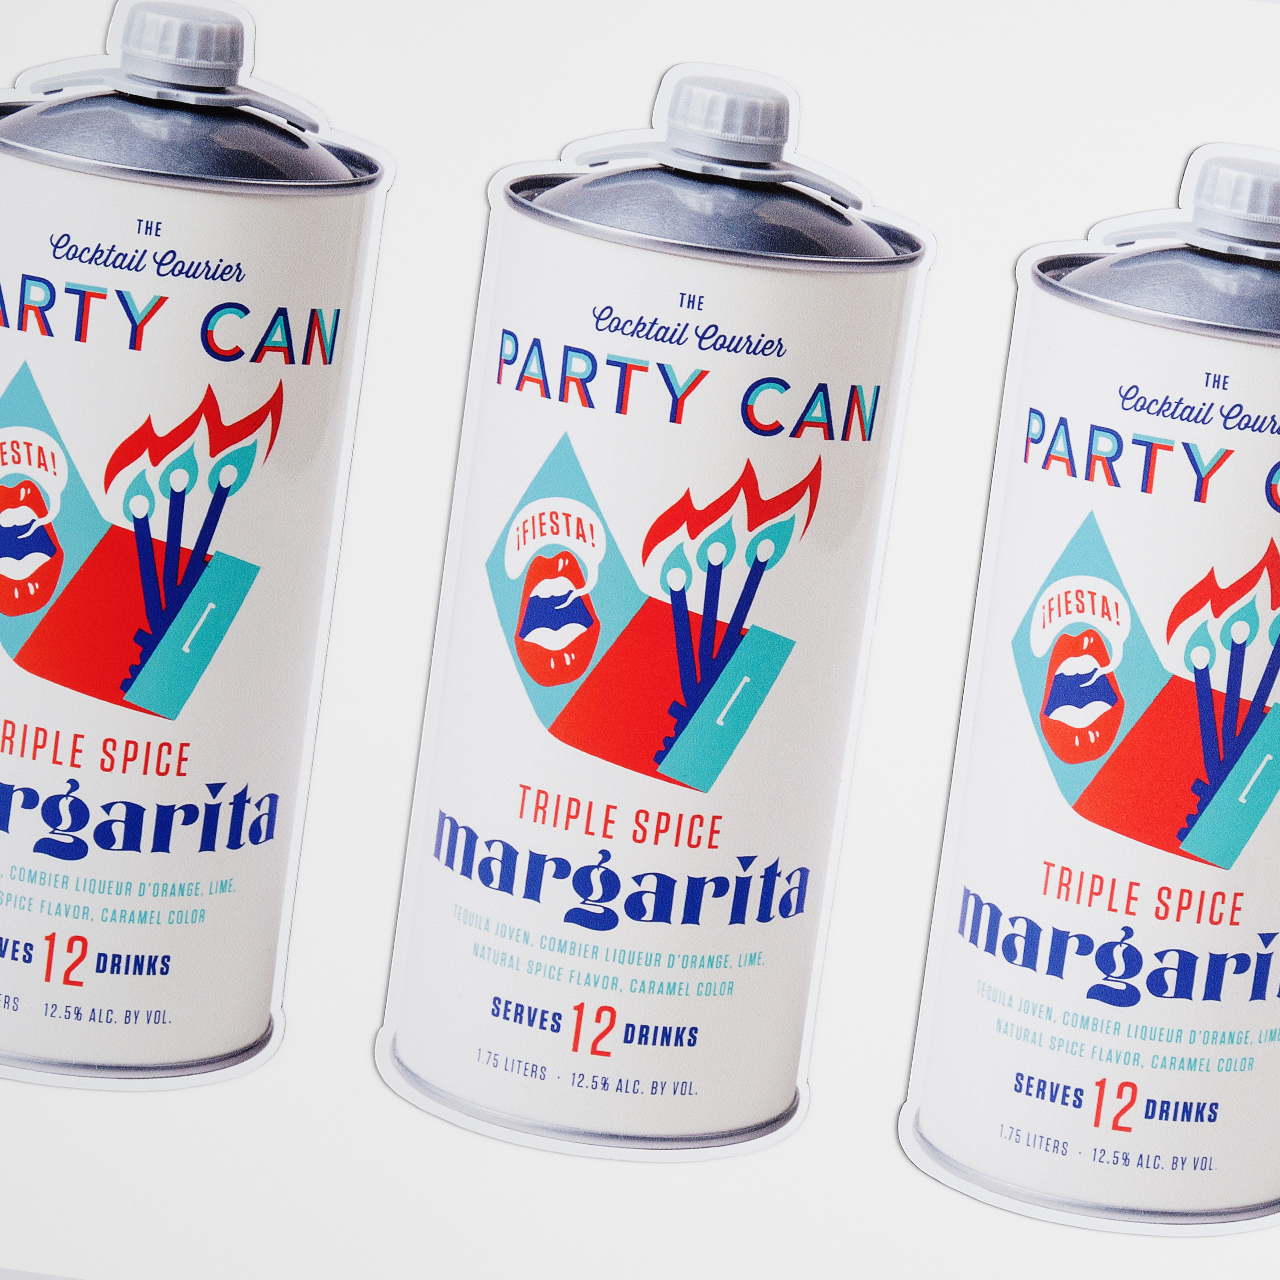 Three vehicle magnets printed in the shape of a margarita can with 